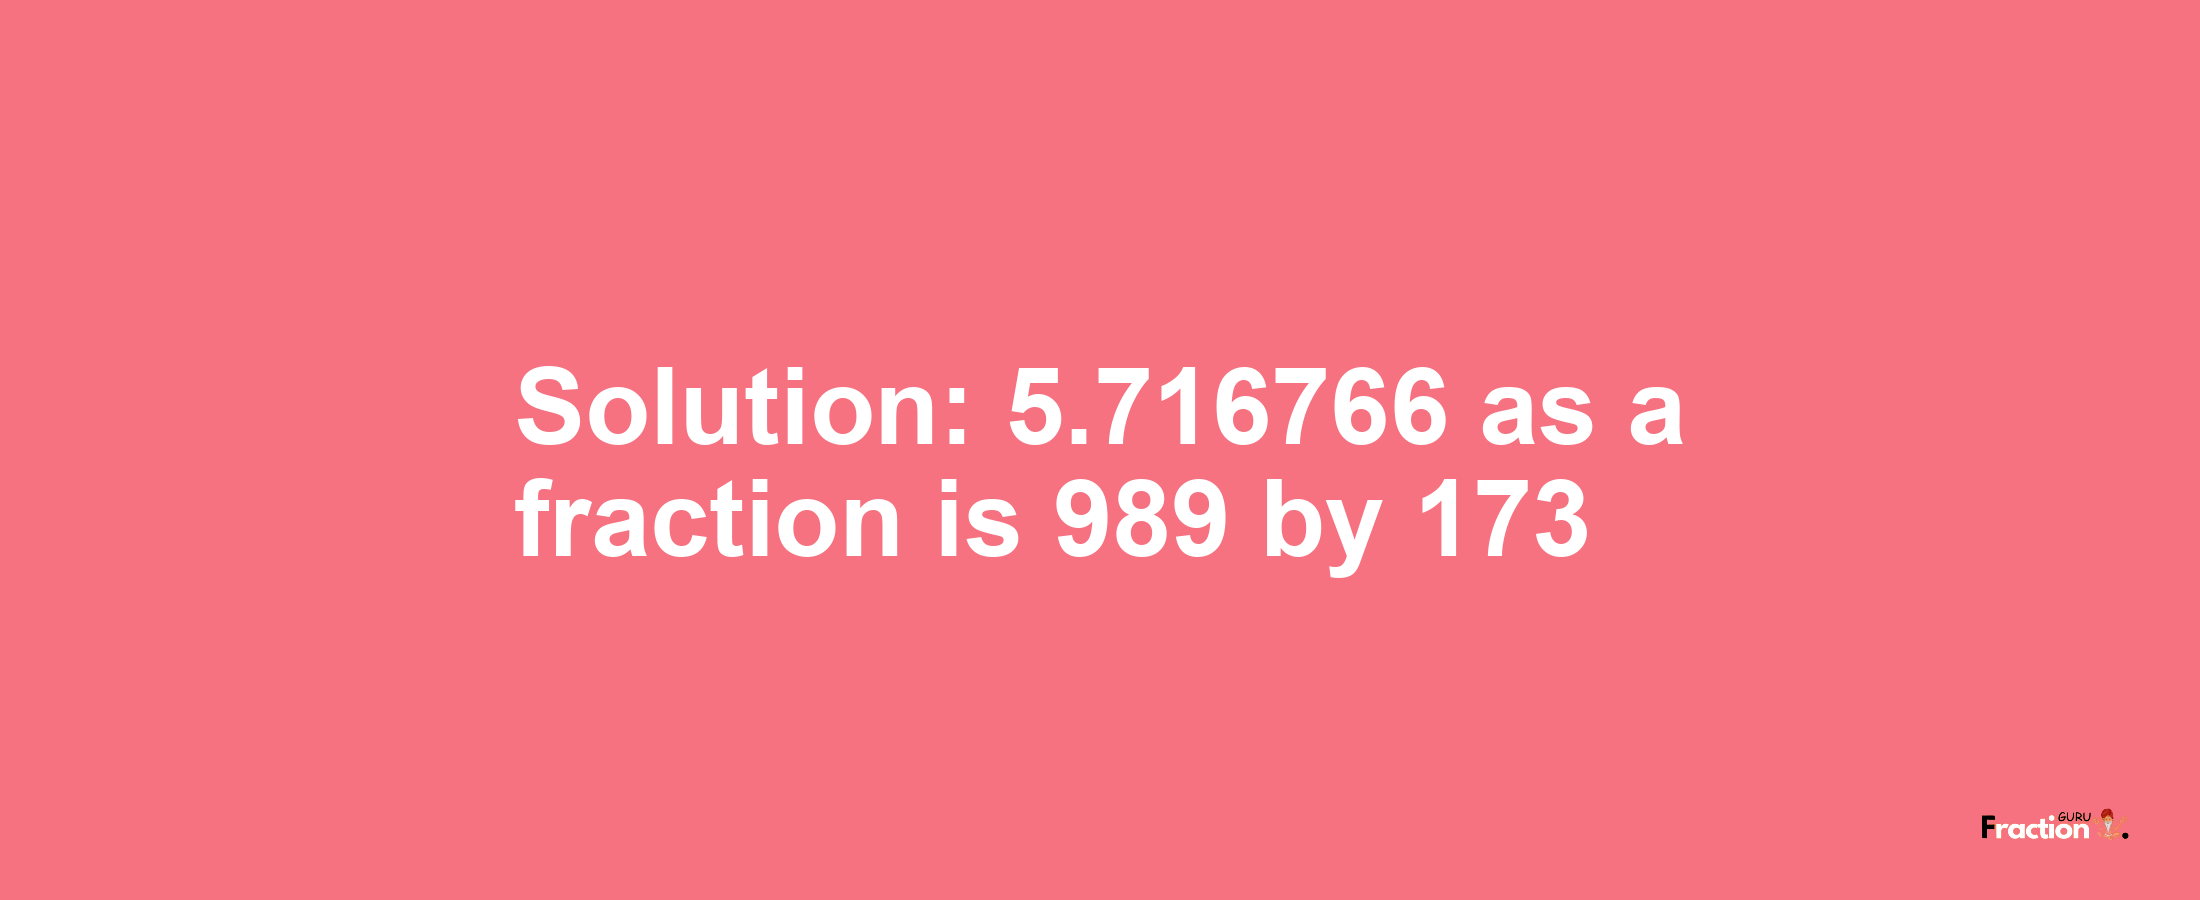 Solution:5.716766 as a fraction is 989/173